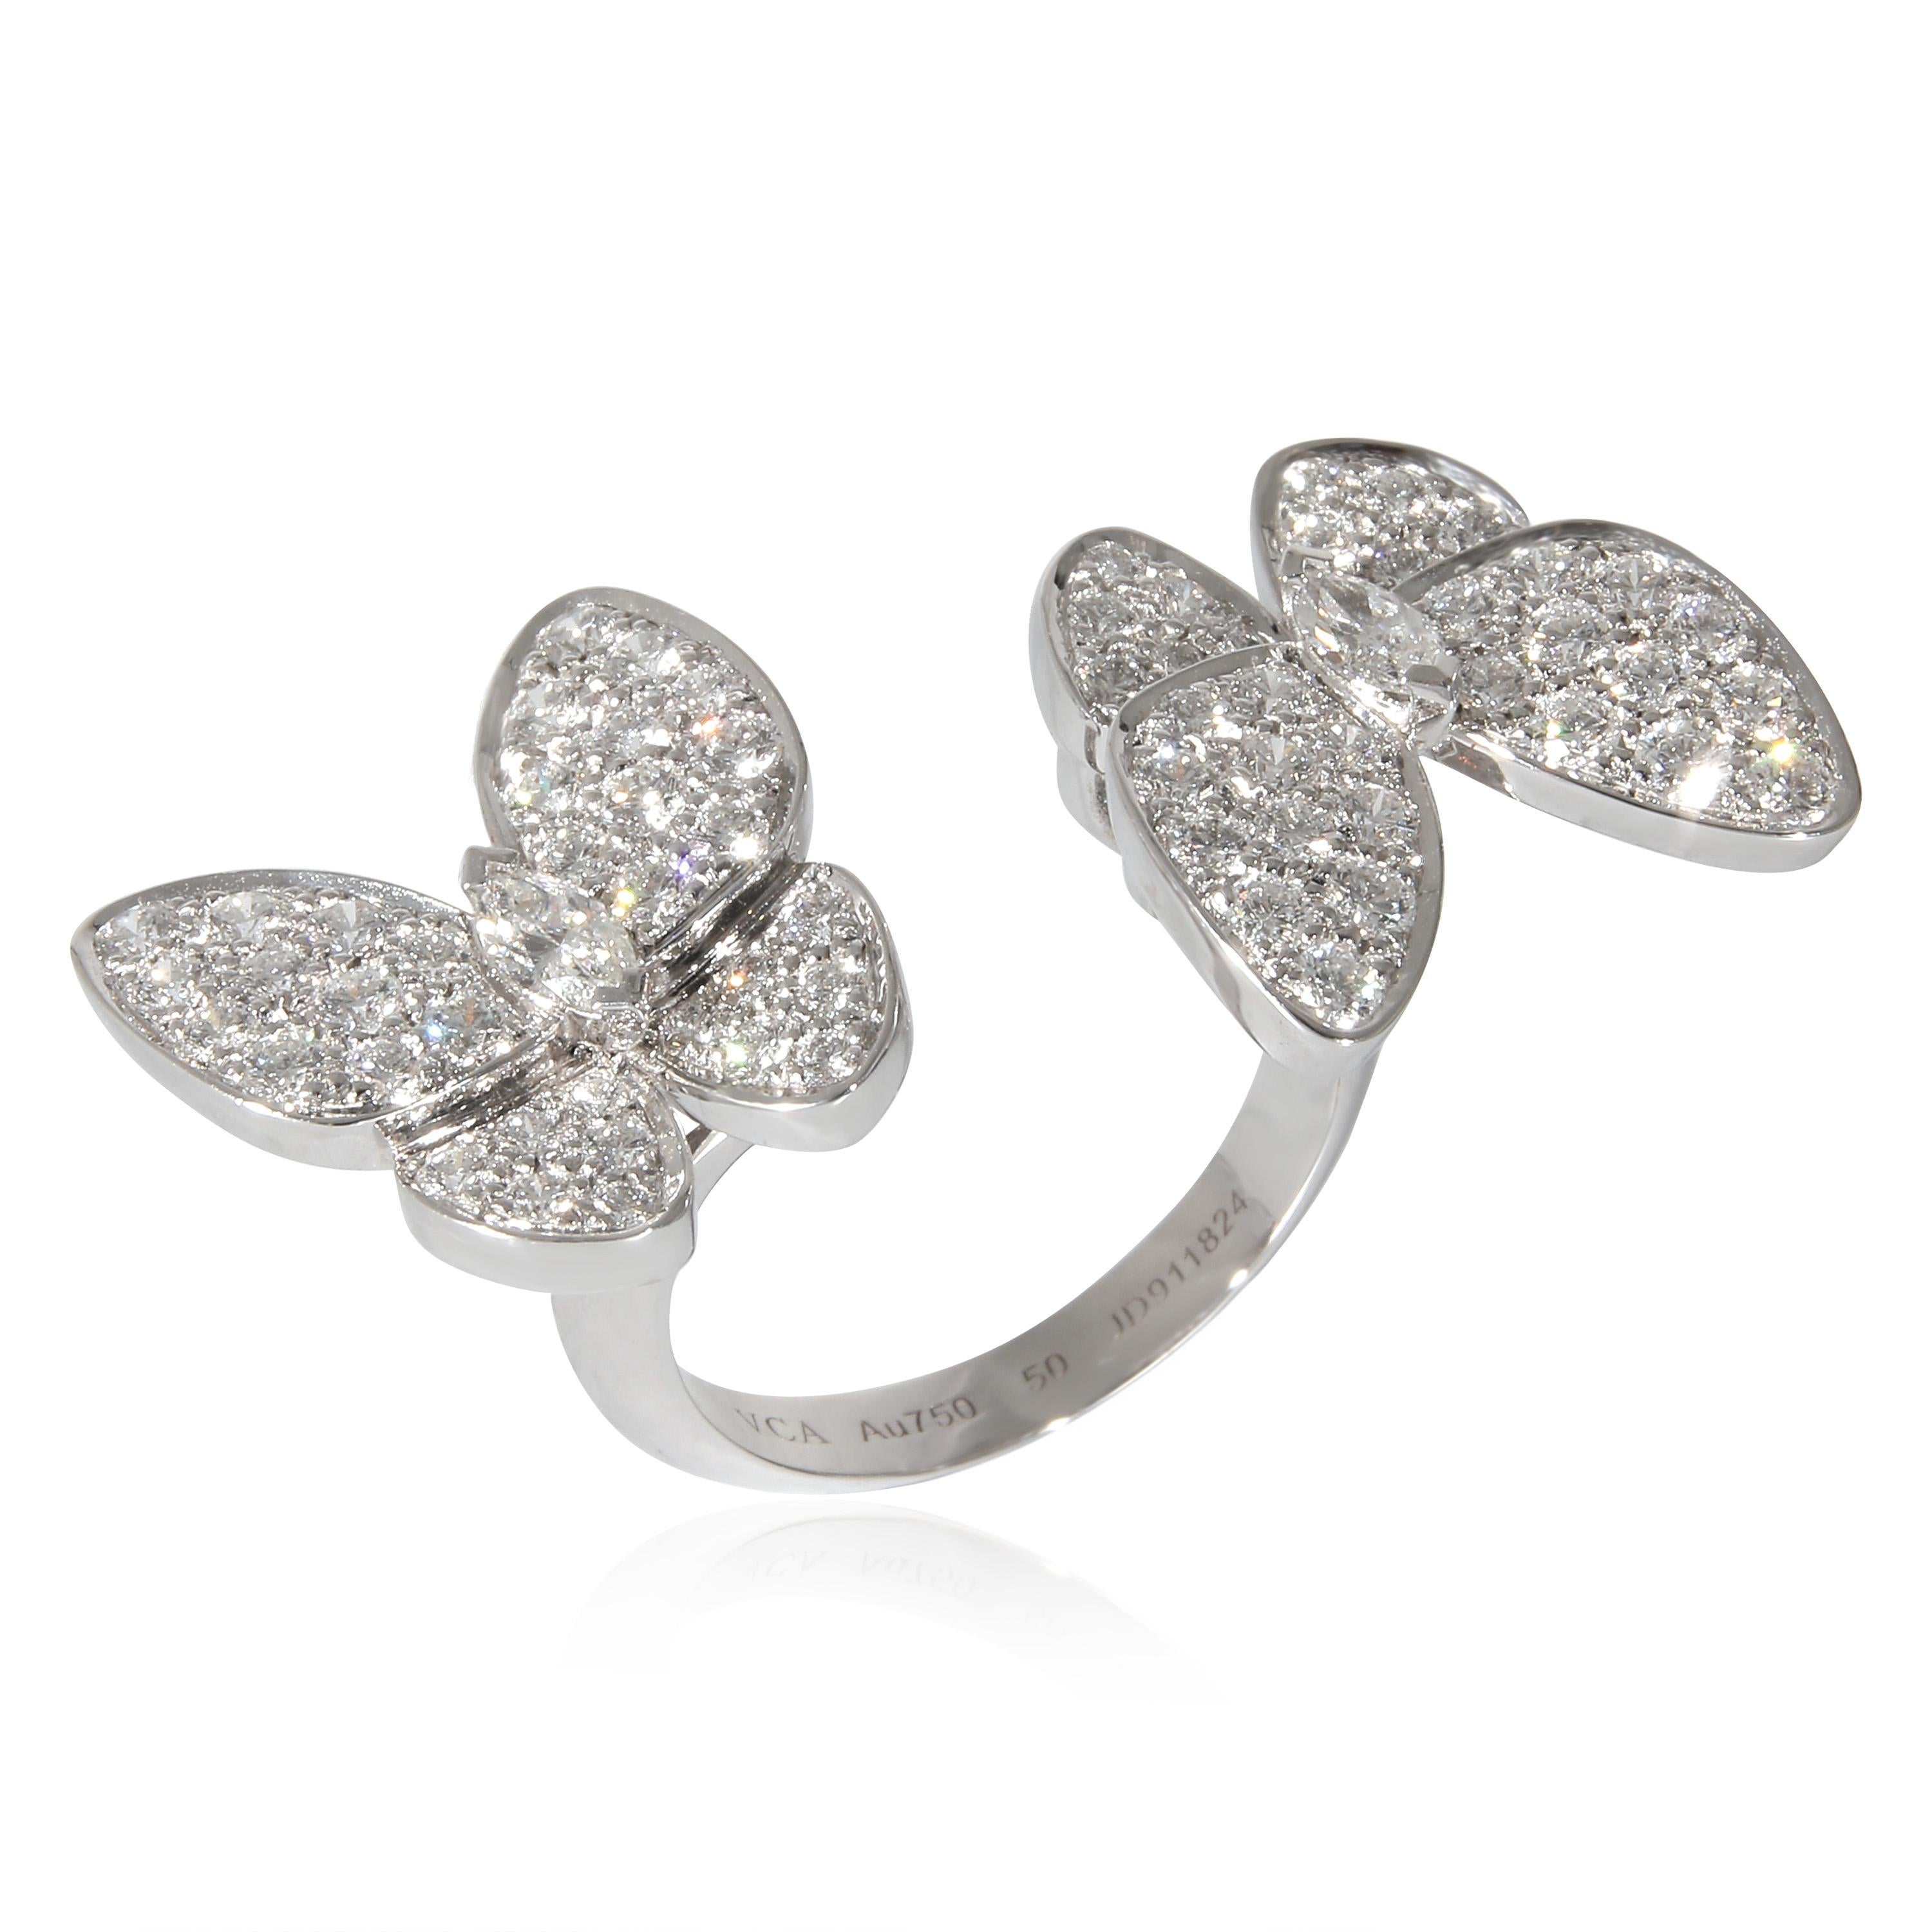 Van Cleef & Arpels Two Butterfly Diamond Ring in 18K White Gold 1.67 CTW

PRIMARY DETAILS
SKU: 133712
Listing Title: Van Cleef & Arpels Two Butterfly Diamond Ring in 18K White Gold 1.67 CTW
Condition Description: Retails for 29300 USD. In excellent